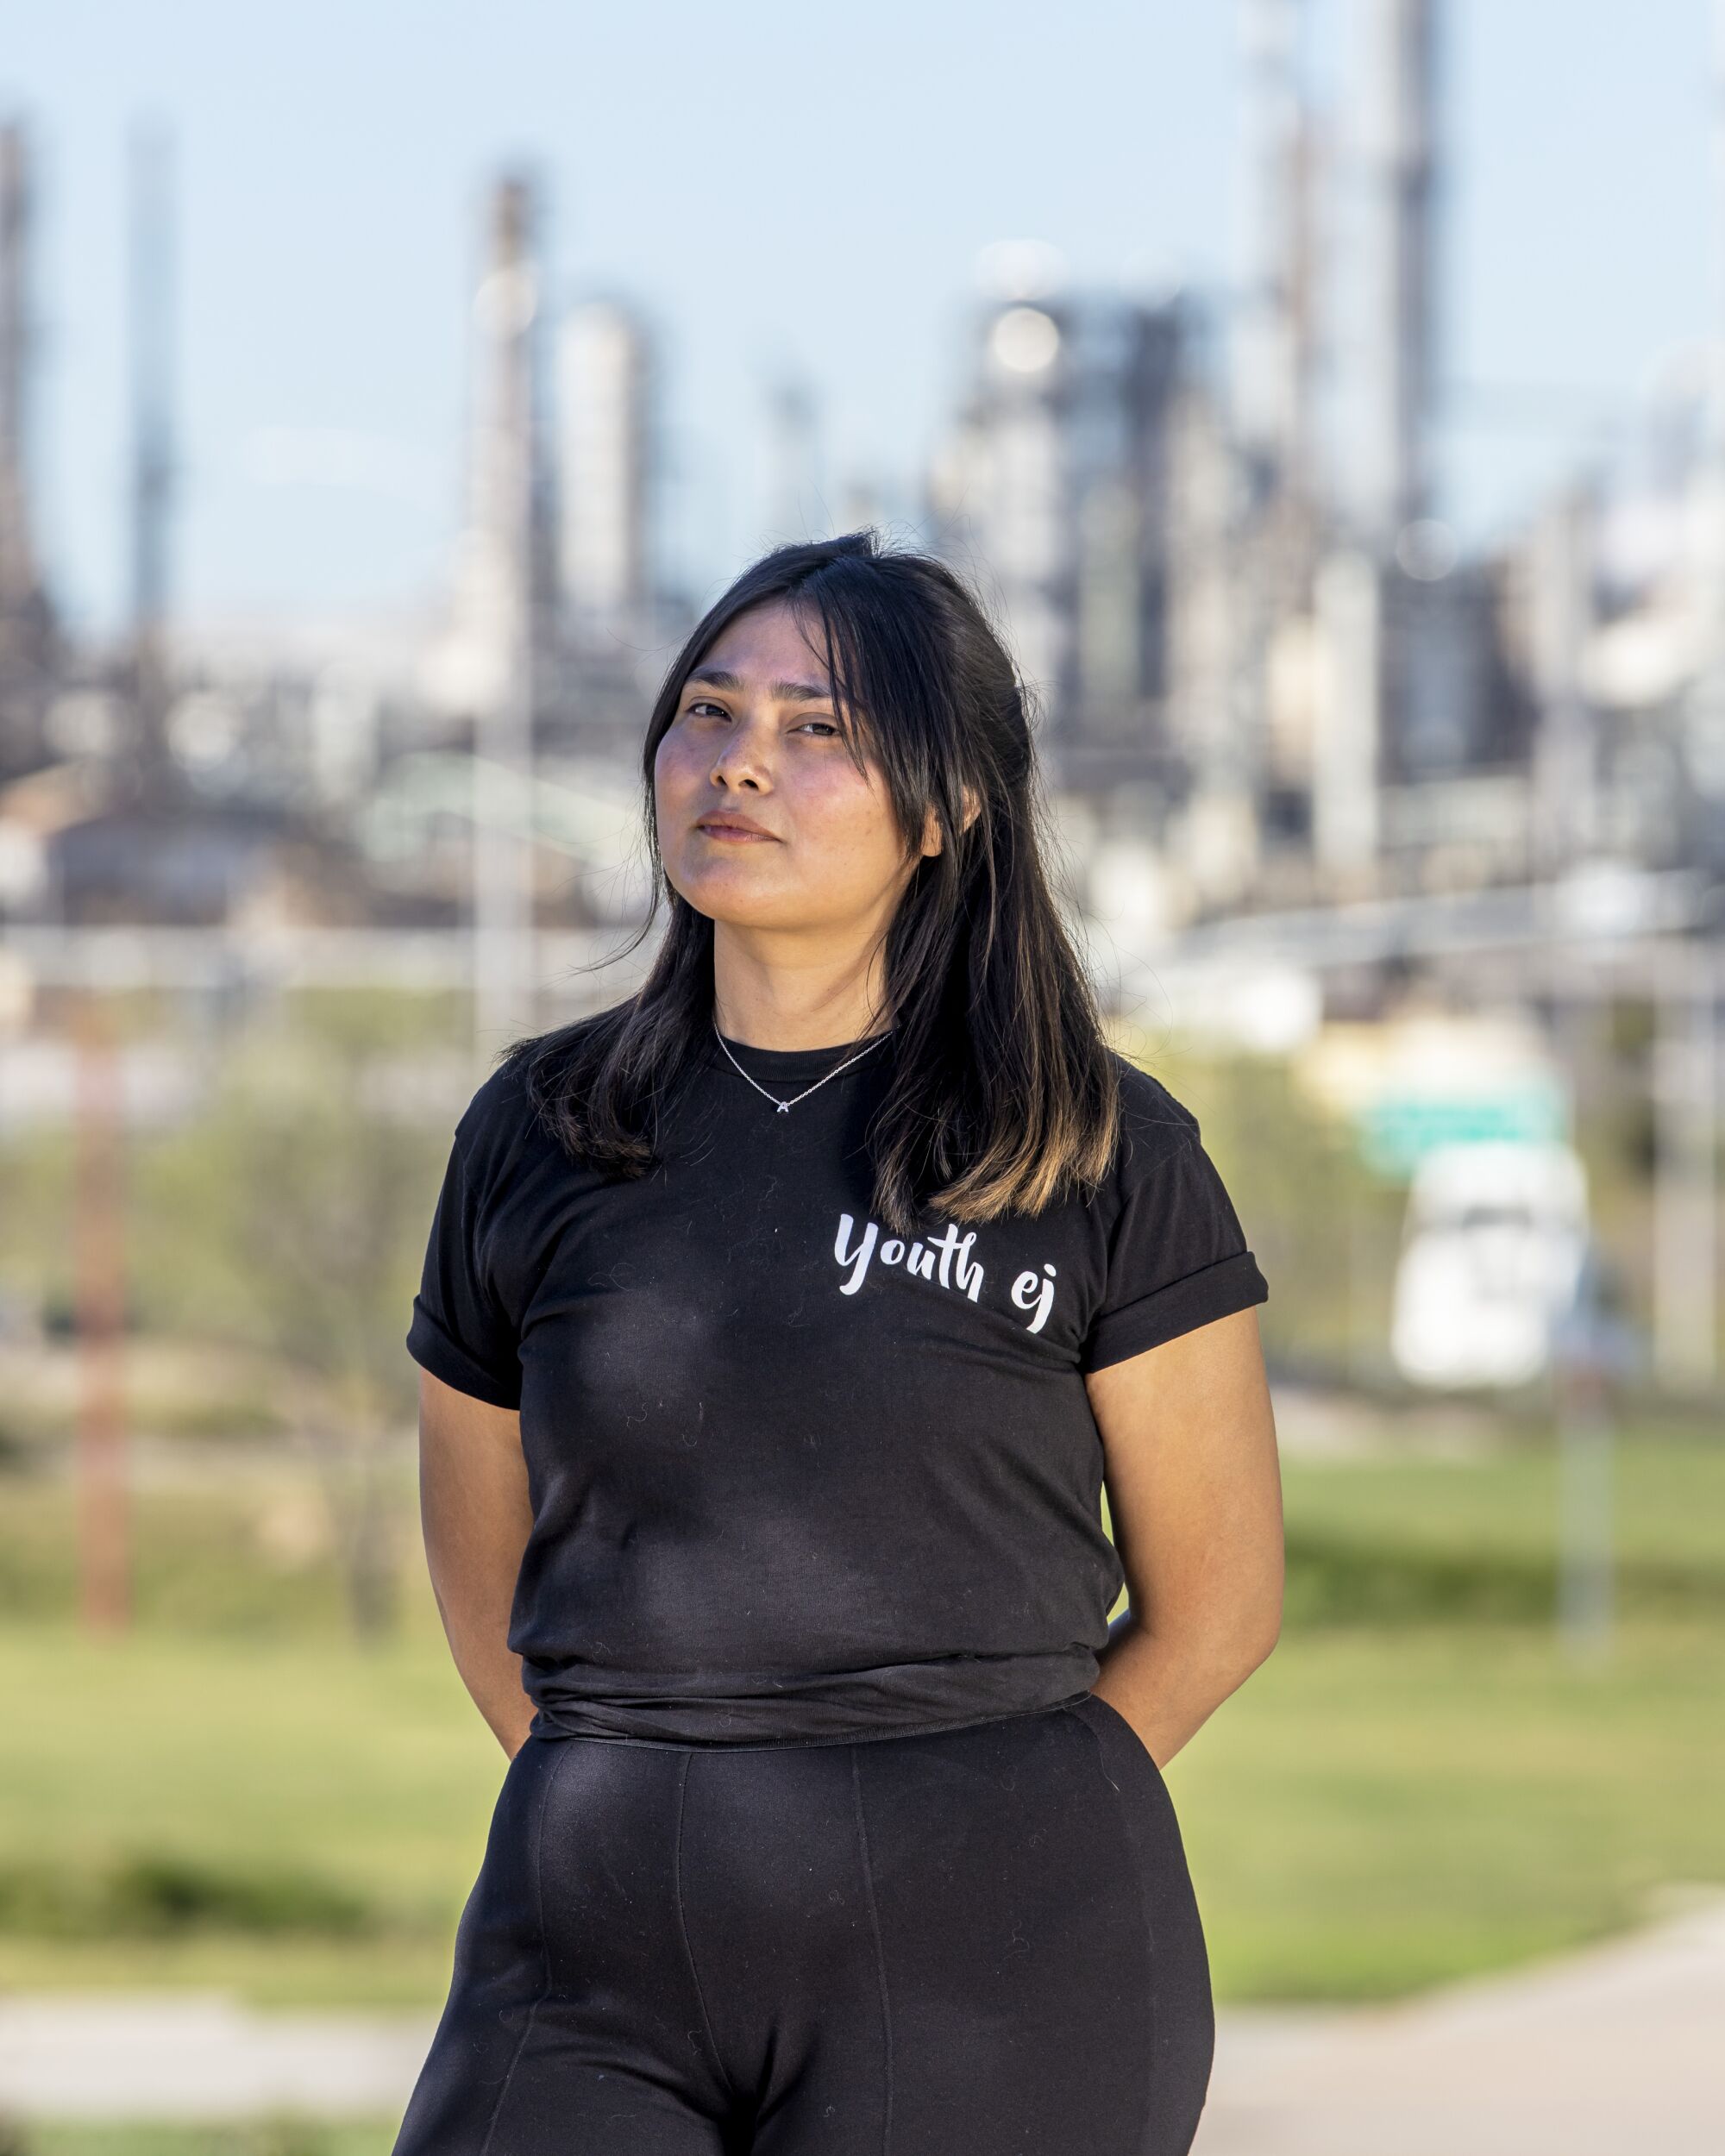 A young woman stands in front of an oil refinery